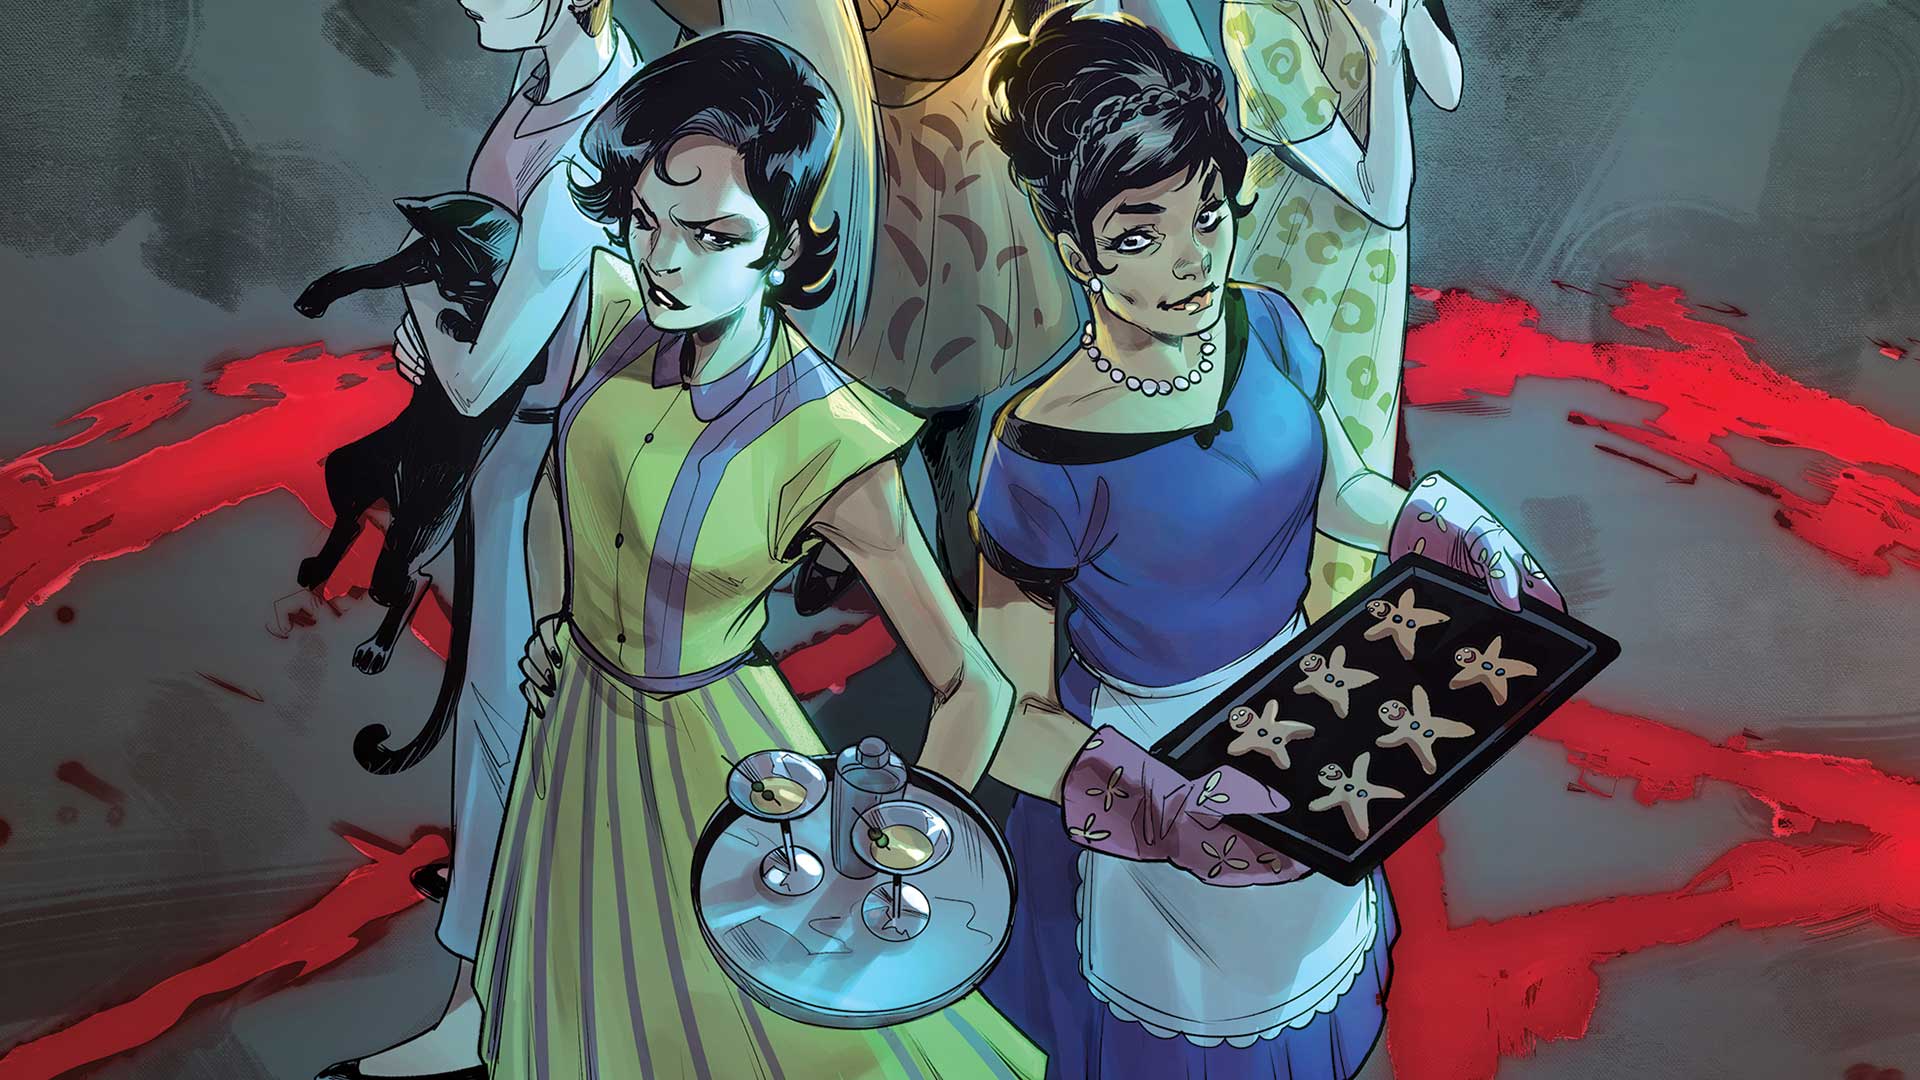 Hex Wives # 6 review: The end of the beginning